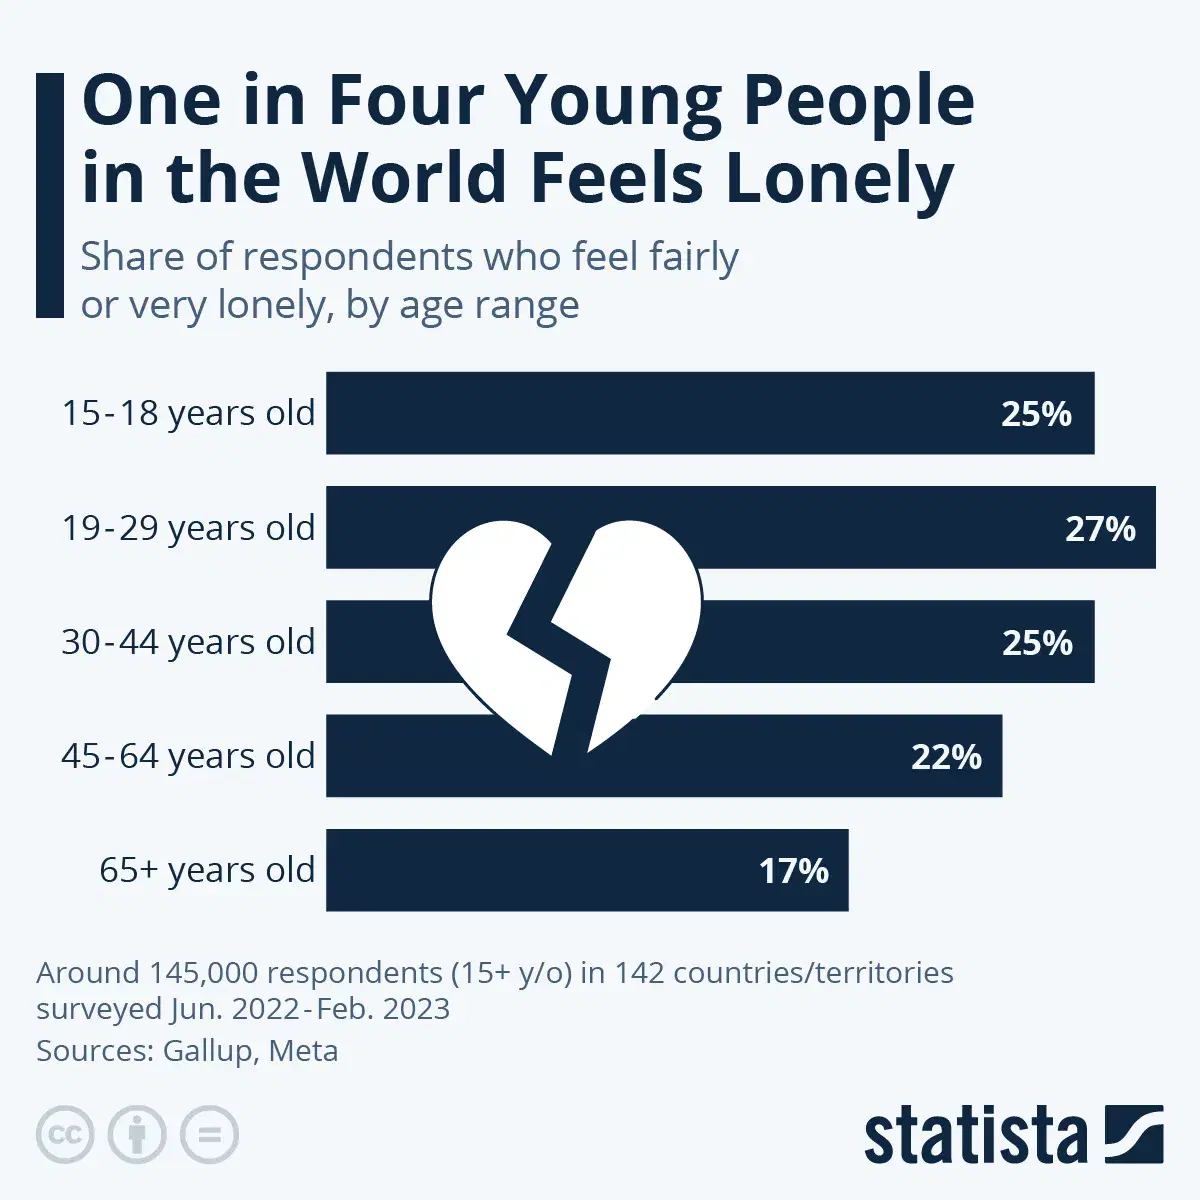 One in Four Young People in the World Feels Lonely